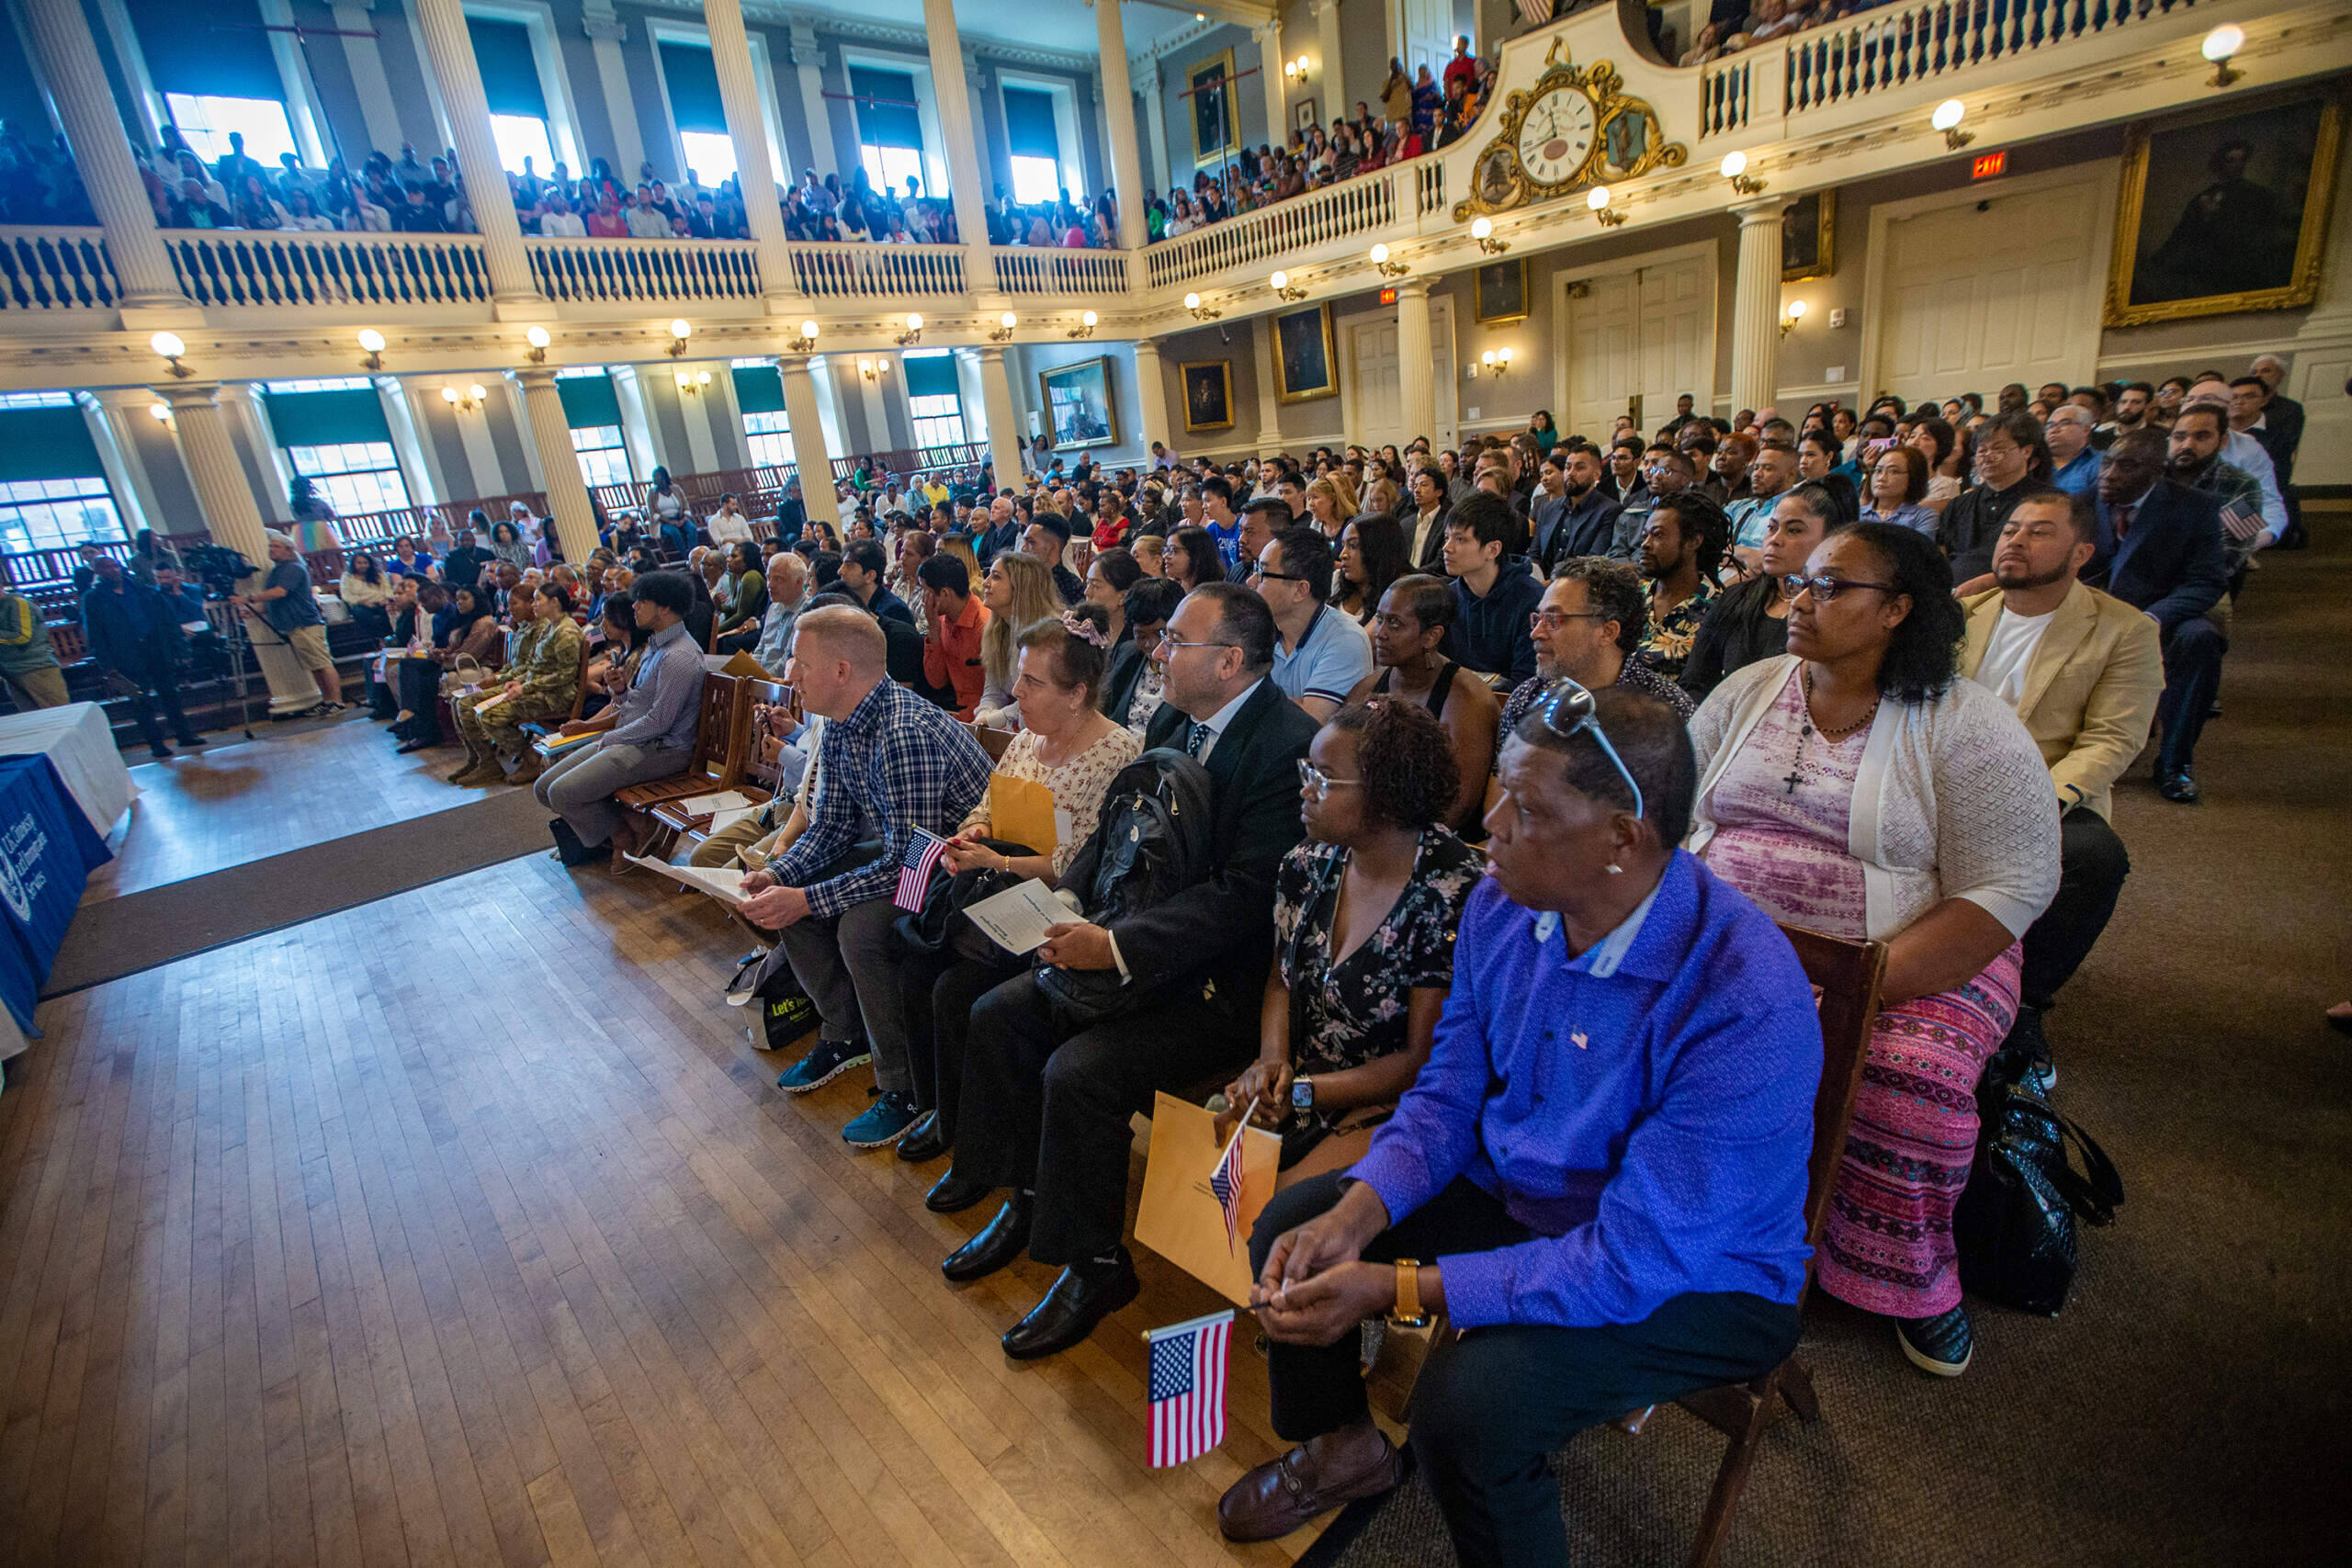 New citizens listen to federal Judge Janet Bostwick speak during a naturalization ceremony at Faneuil Hall. (Jesse Costa/WBUR)